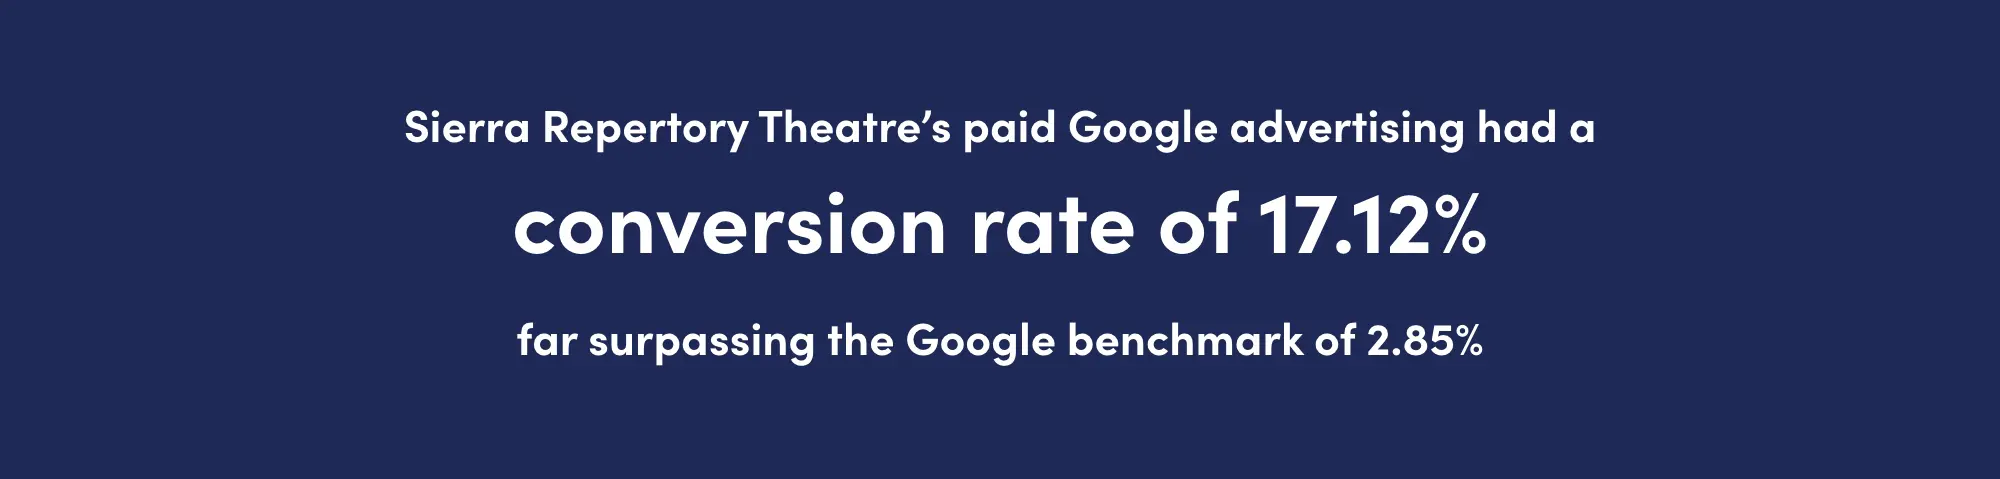 Sierra Repertory Theatre's paid Google advertising had a conversion rate of 17.12% far surpassing the Google benchmark of 2.65%